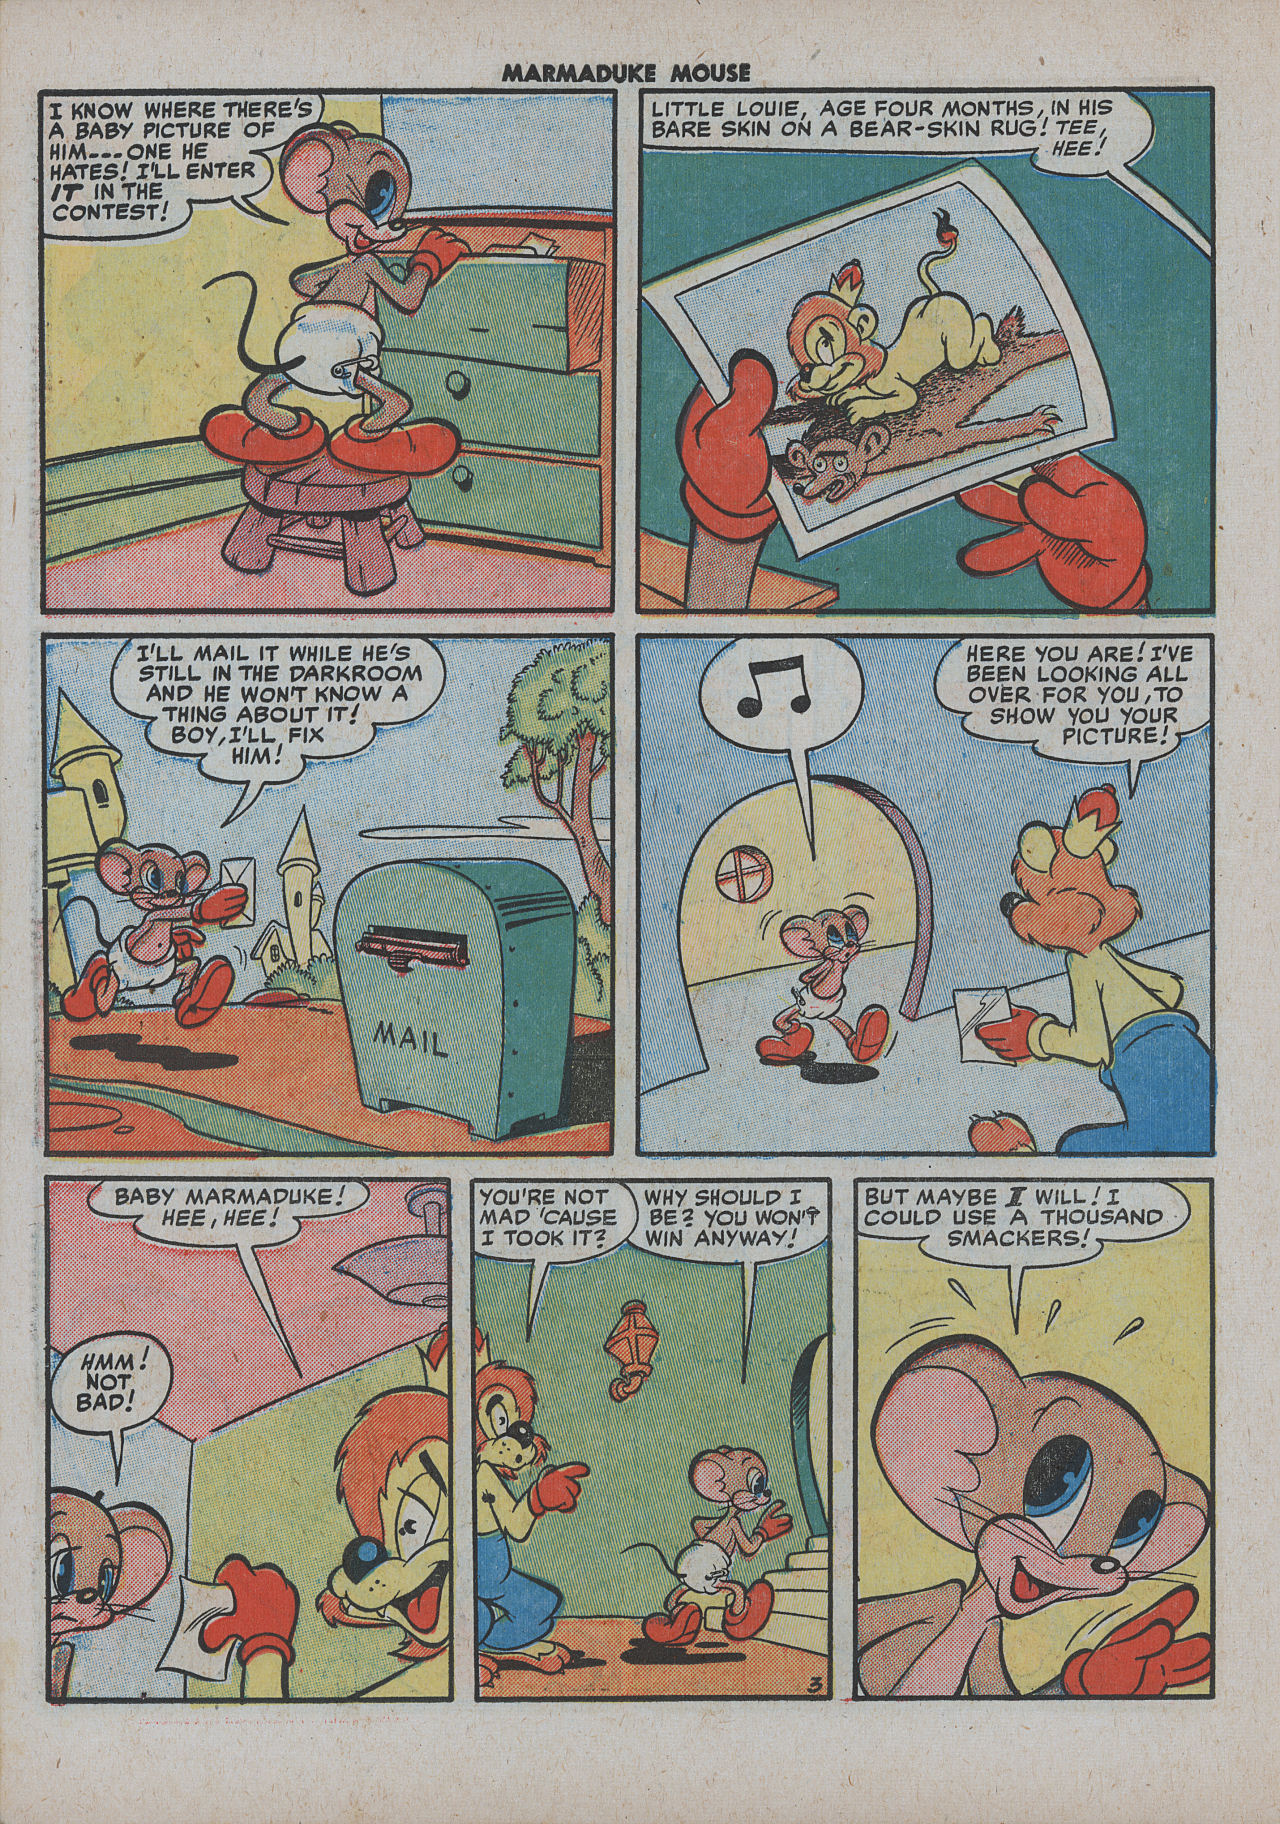 Read online Marmaduke Mouse comic -  Issue #24 - 34